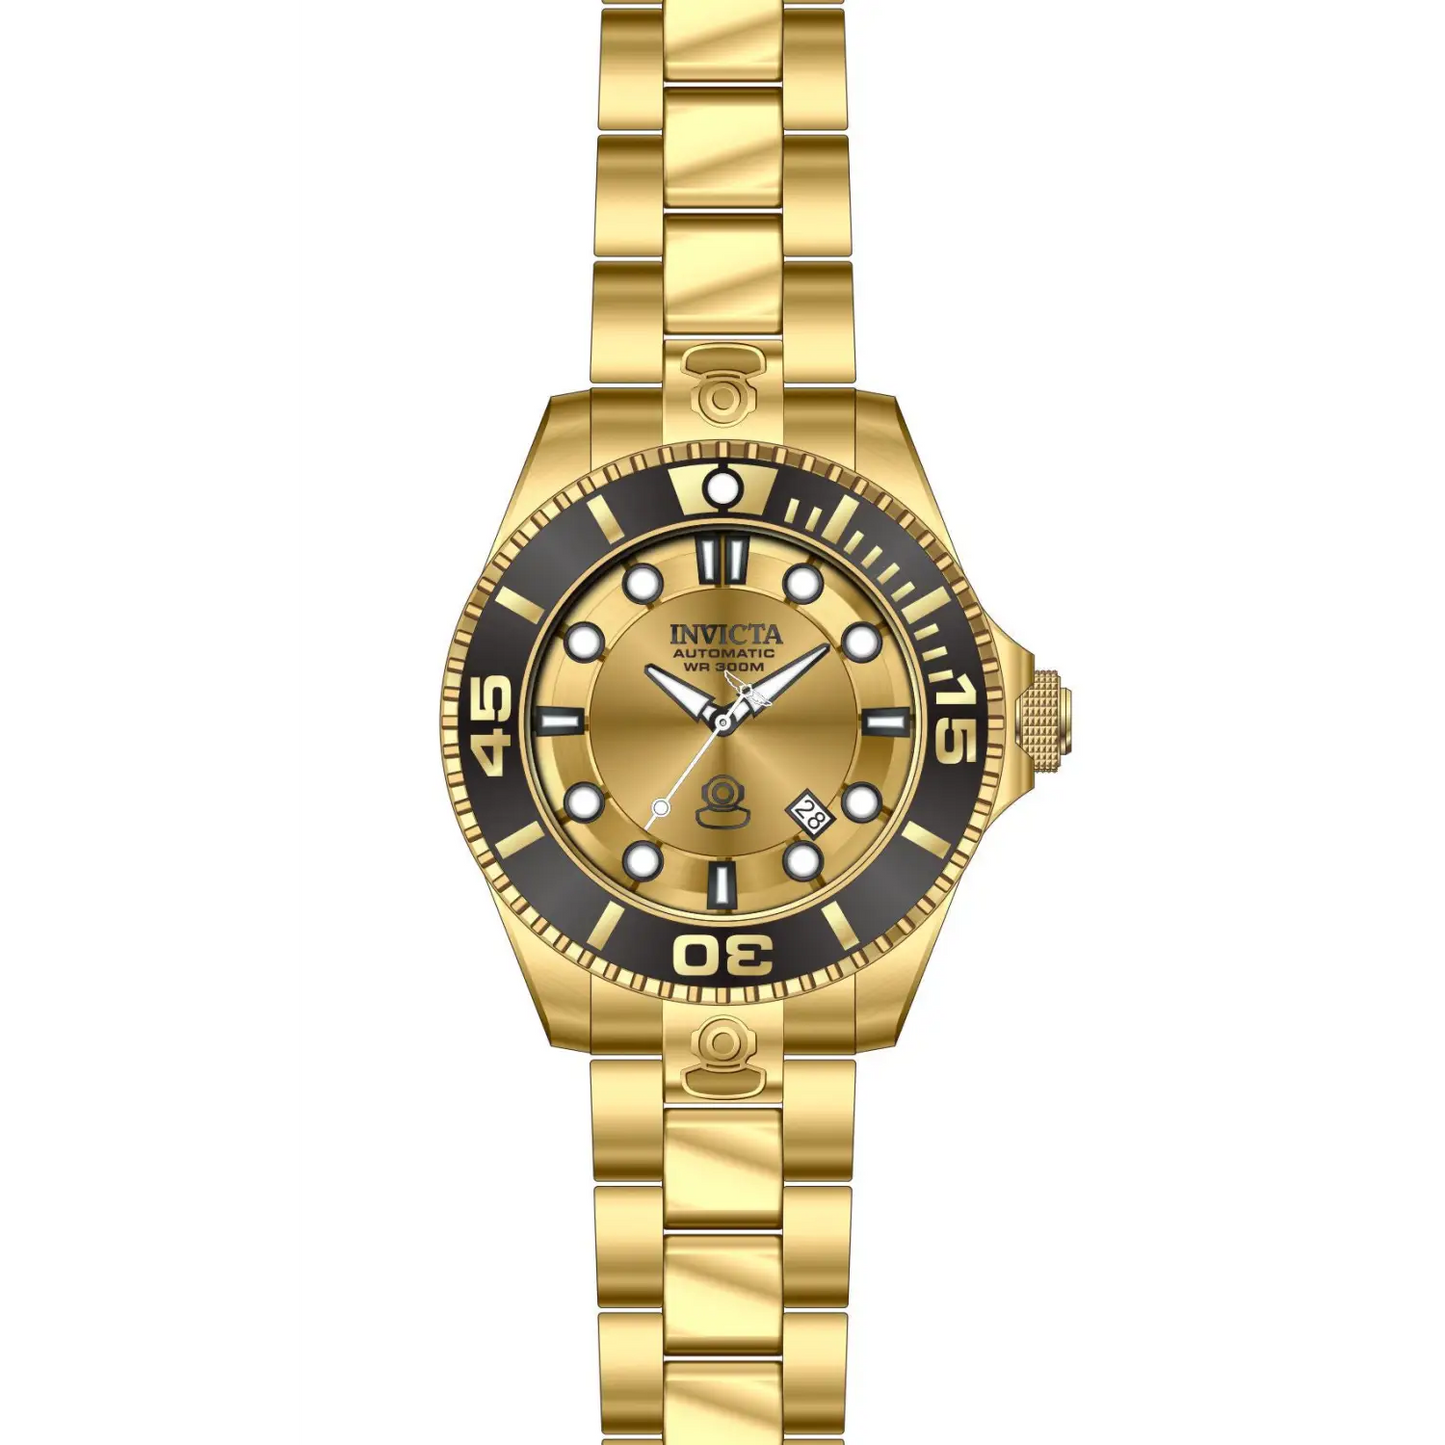 Invicta Men’s Pro Diver Automatic 300m Gold Plated Stainless